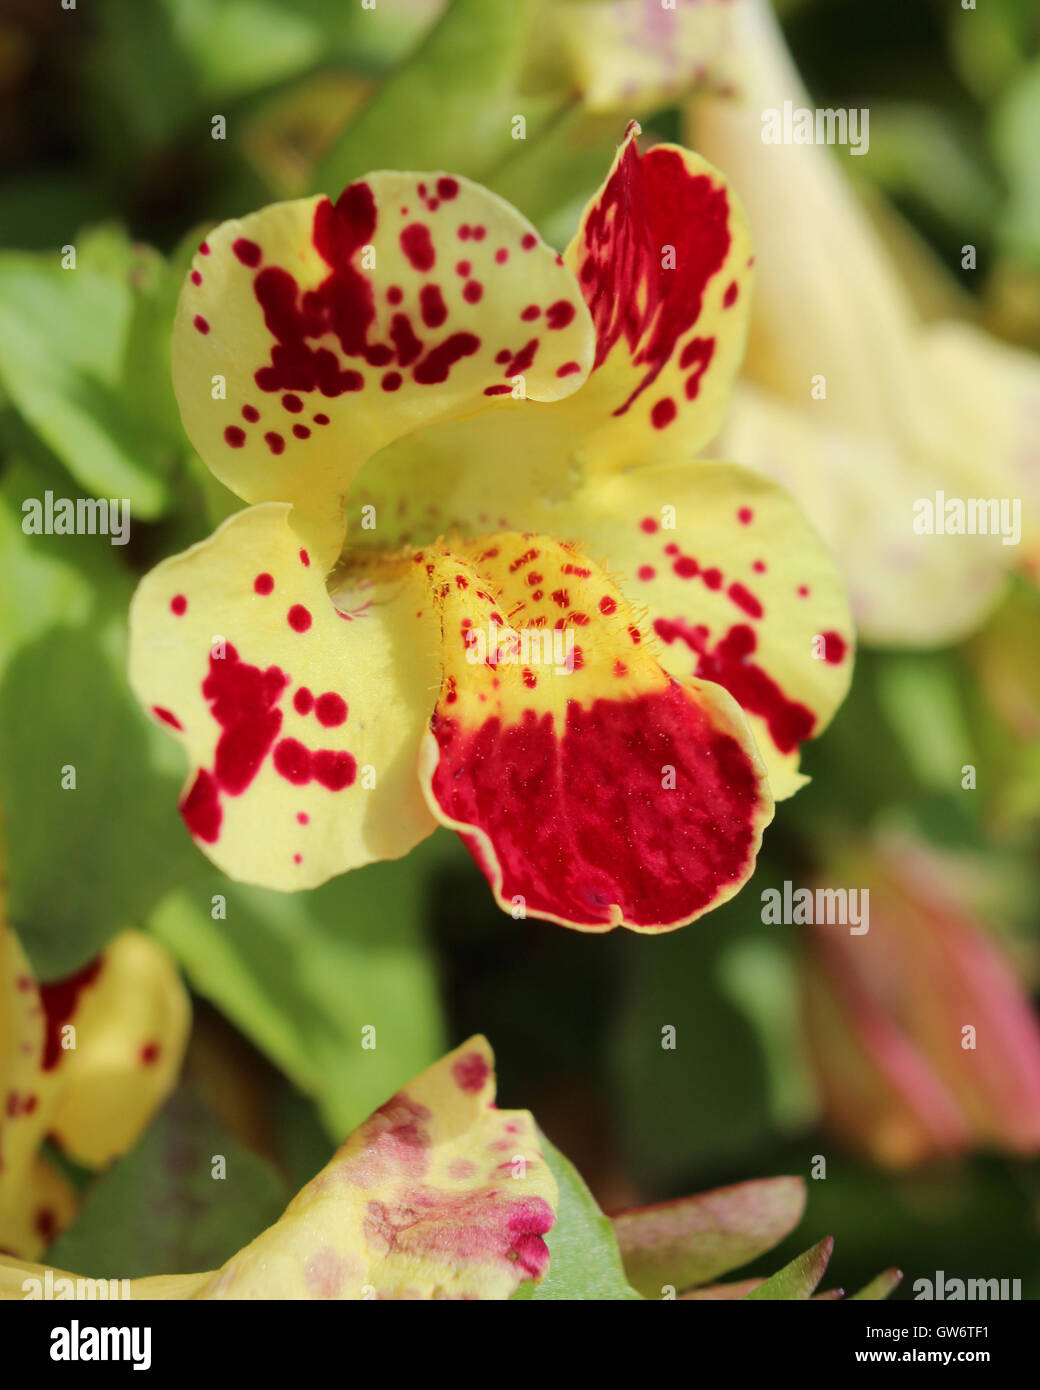 The unusual yellow spotted flower of Mimulus also known as Monkey Flower. Stock Photo